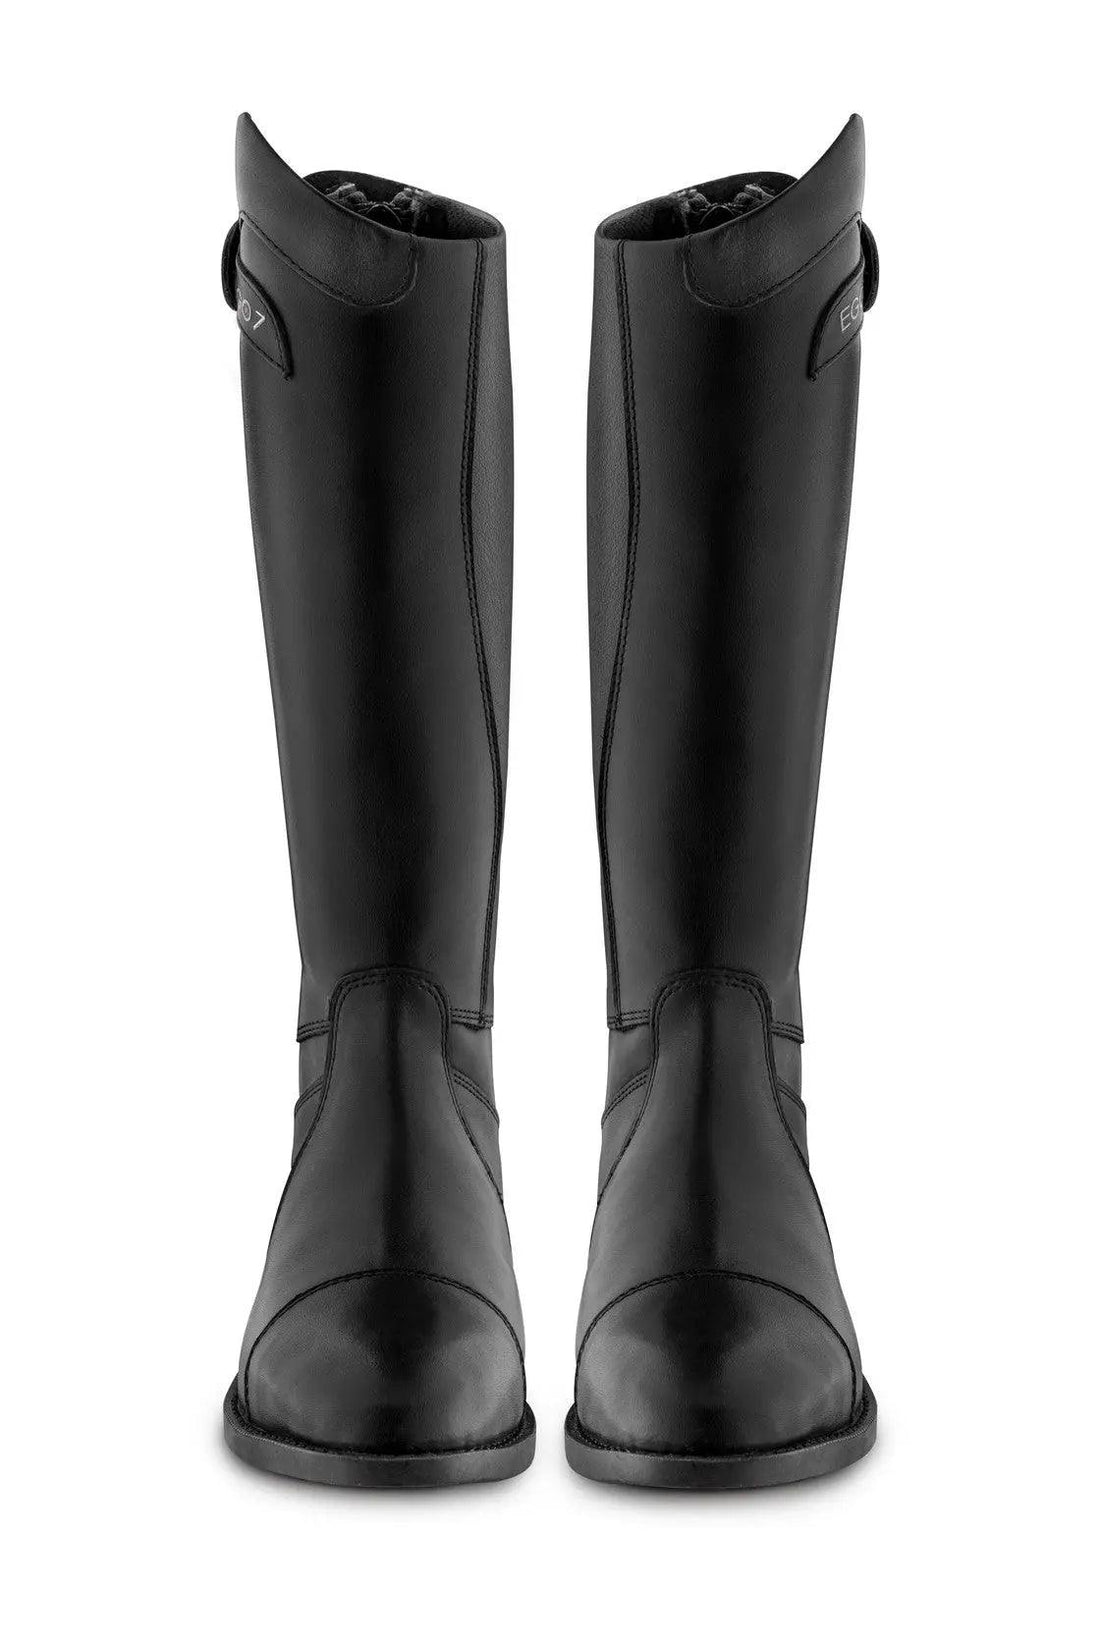 Ego 7 tall boots for kids Delphi Ego 7